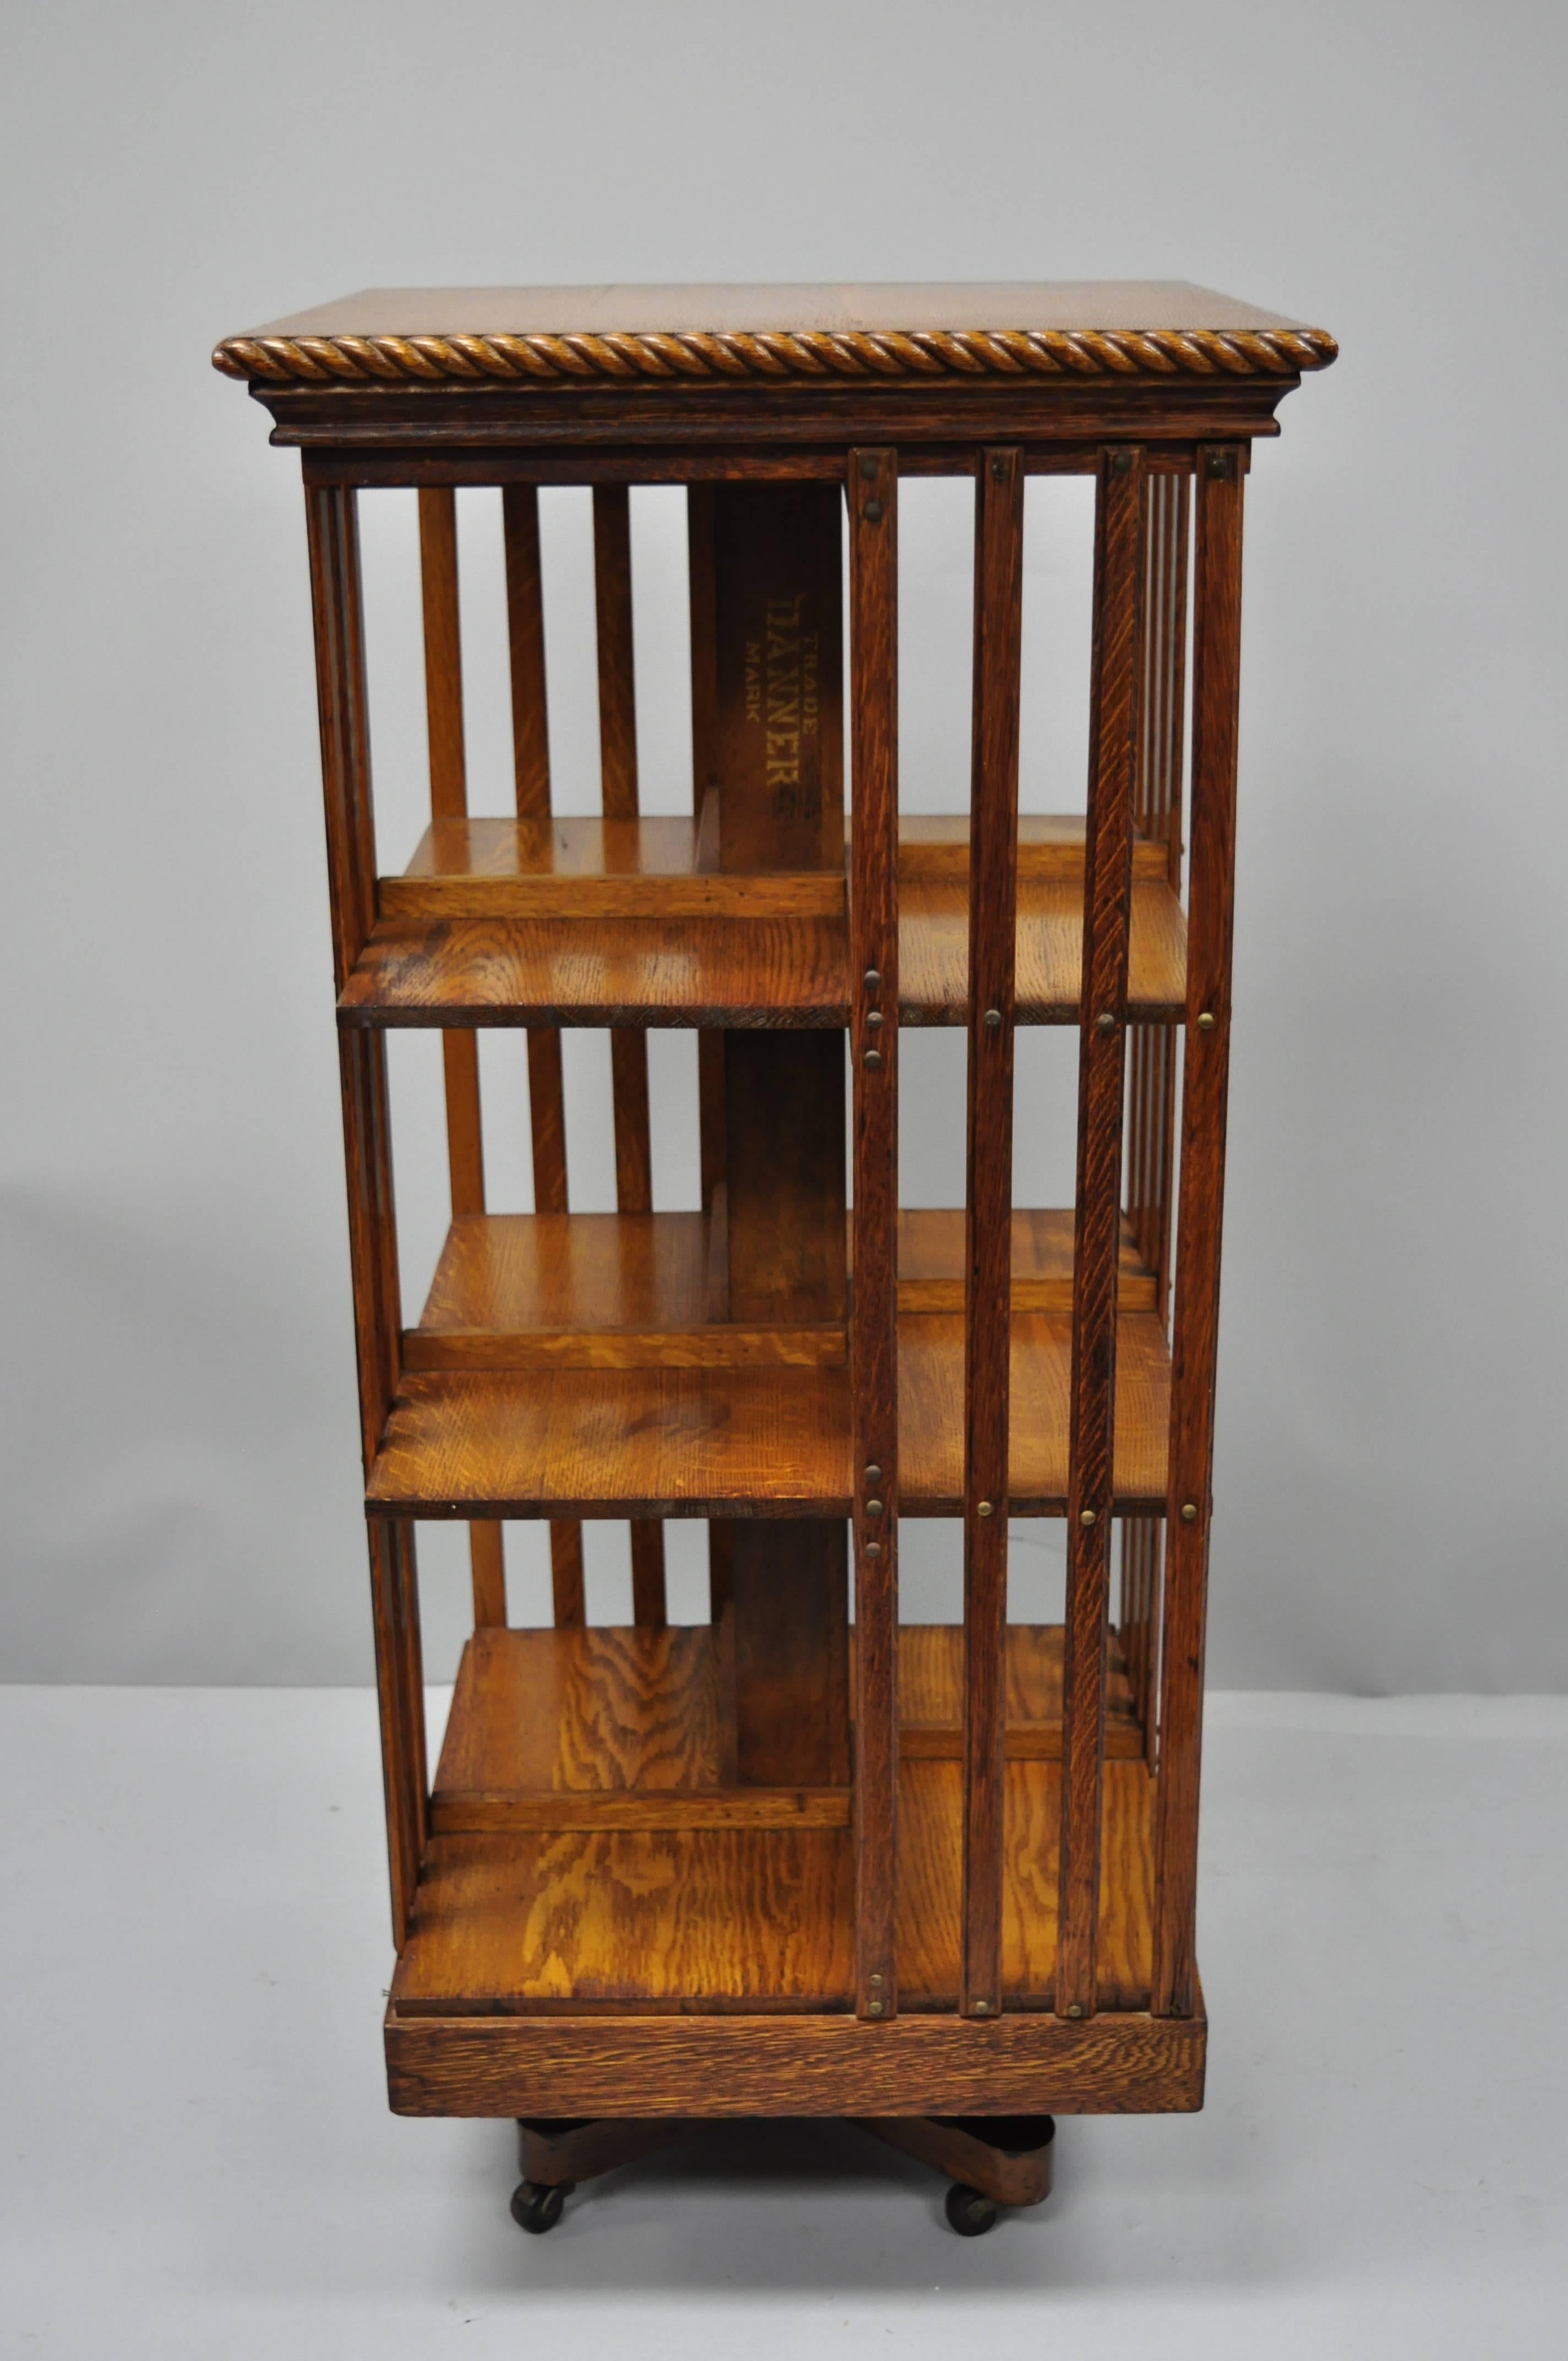 Antique Danner golden oak revolving bookcase. Item features a revolving base with rolling casters, solid wood construction, beautiful wood grain, three-tier, quality American craftsmanship, original Danner marking to center column, circa early